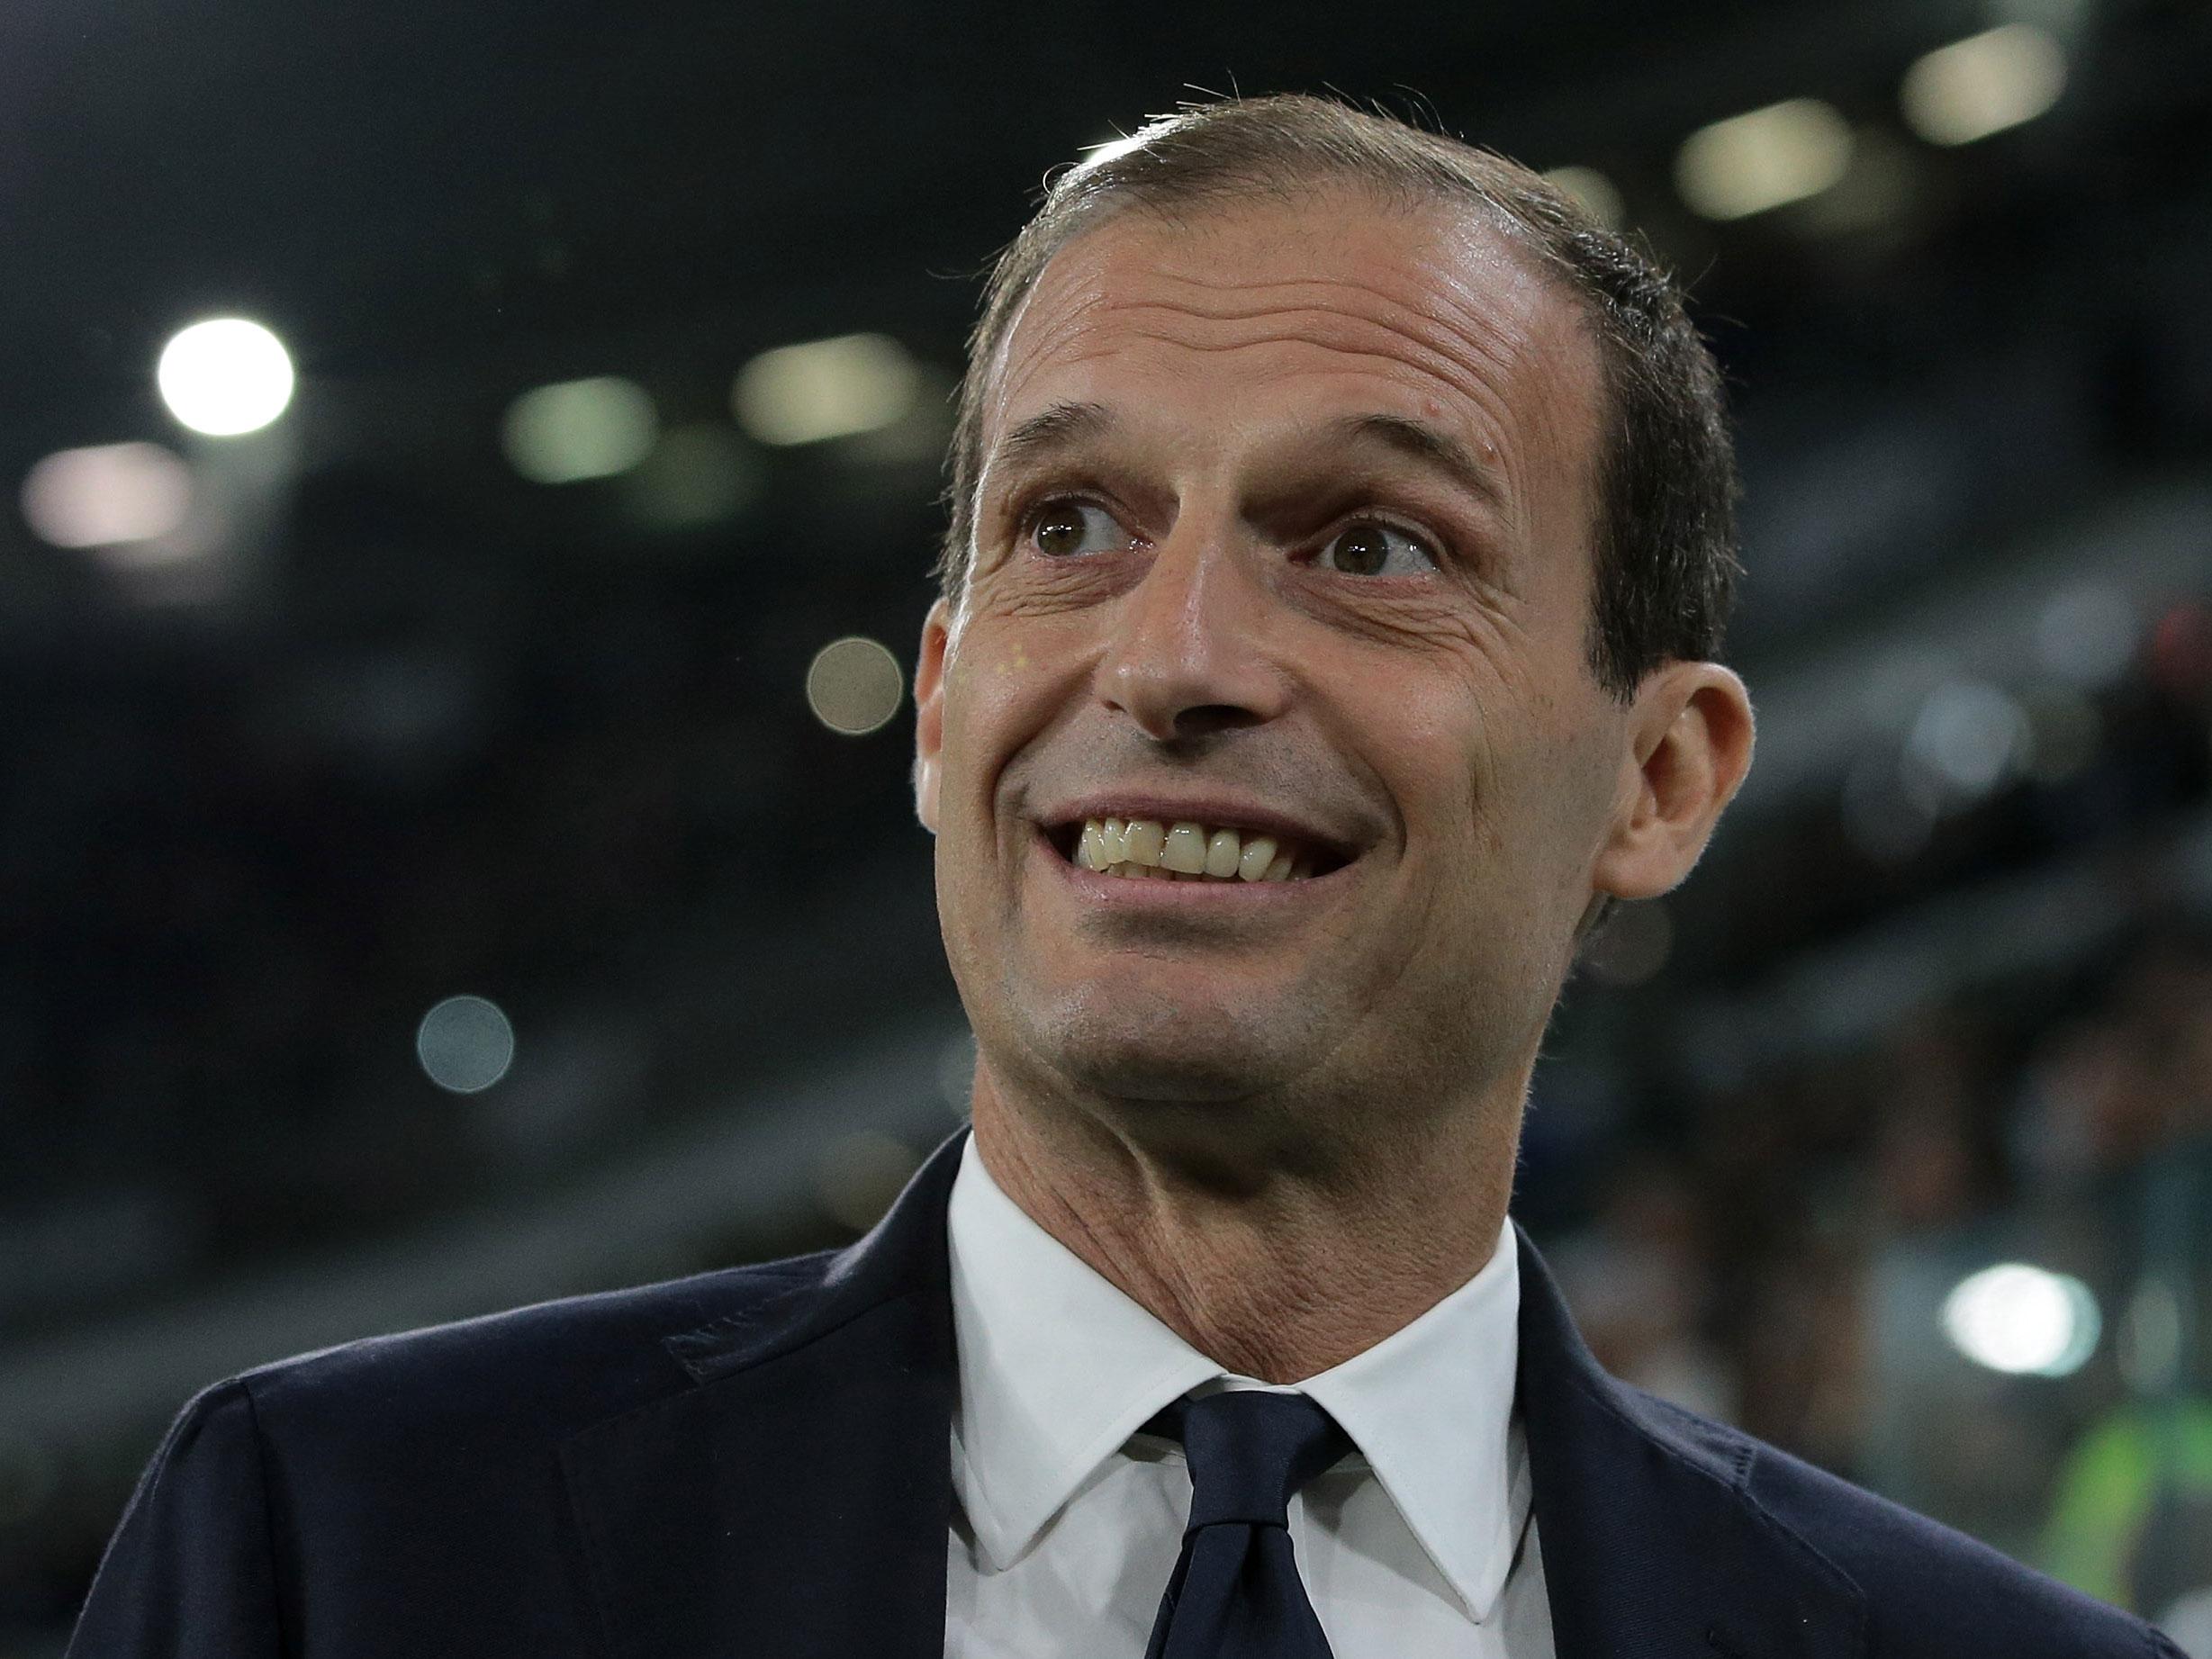 Allegri is thought to be content at Juventus